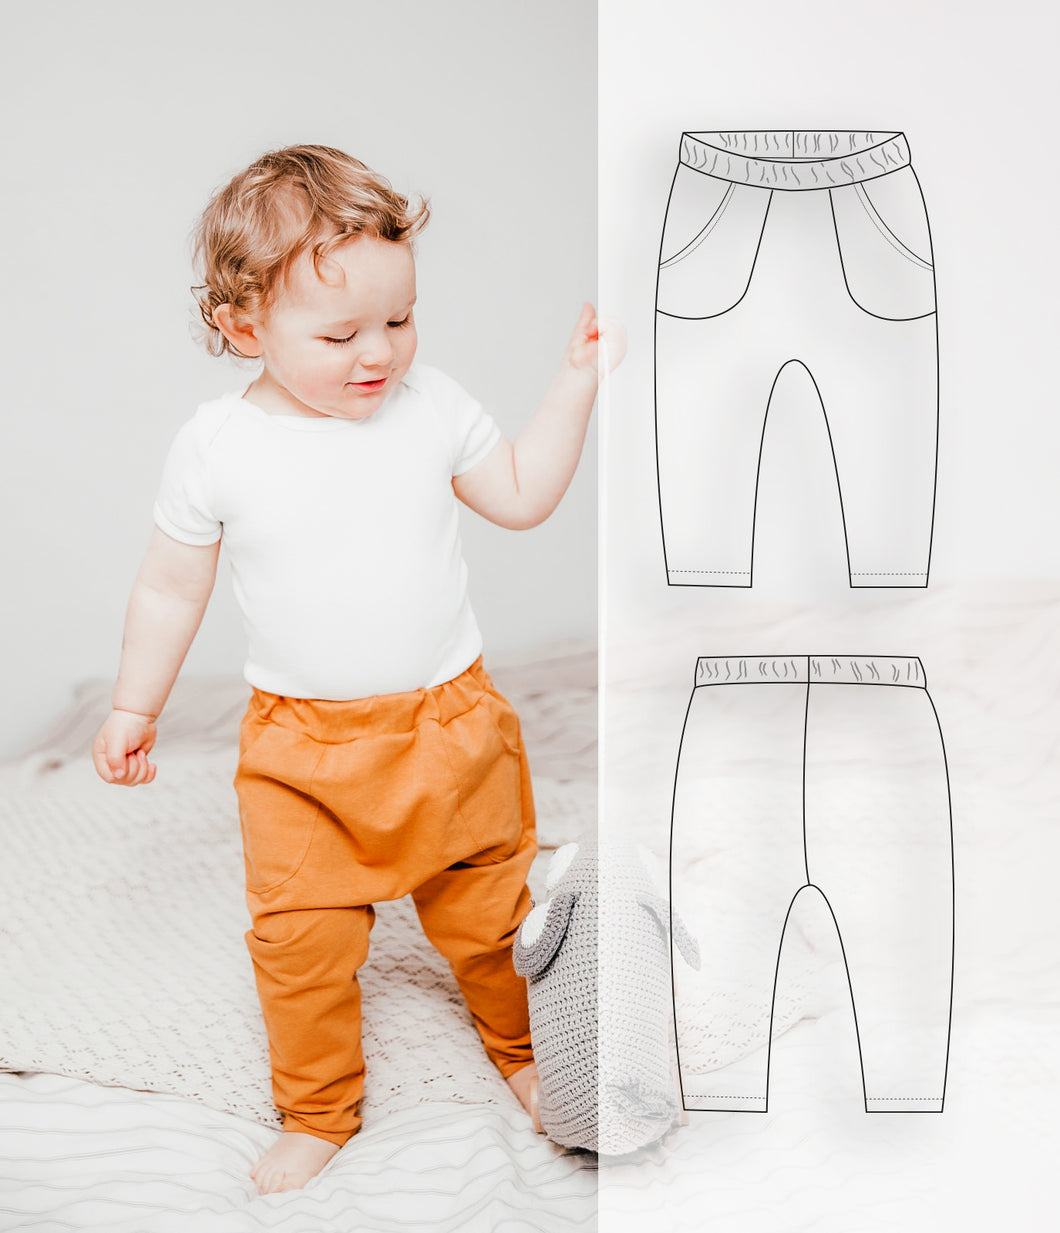 Harem Pants and Shorts Pattern pattern on Craftsy.com | Toddler sewing  patterns, Sewing patterns free, Sewing patterns for kids